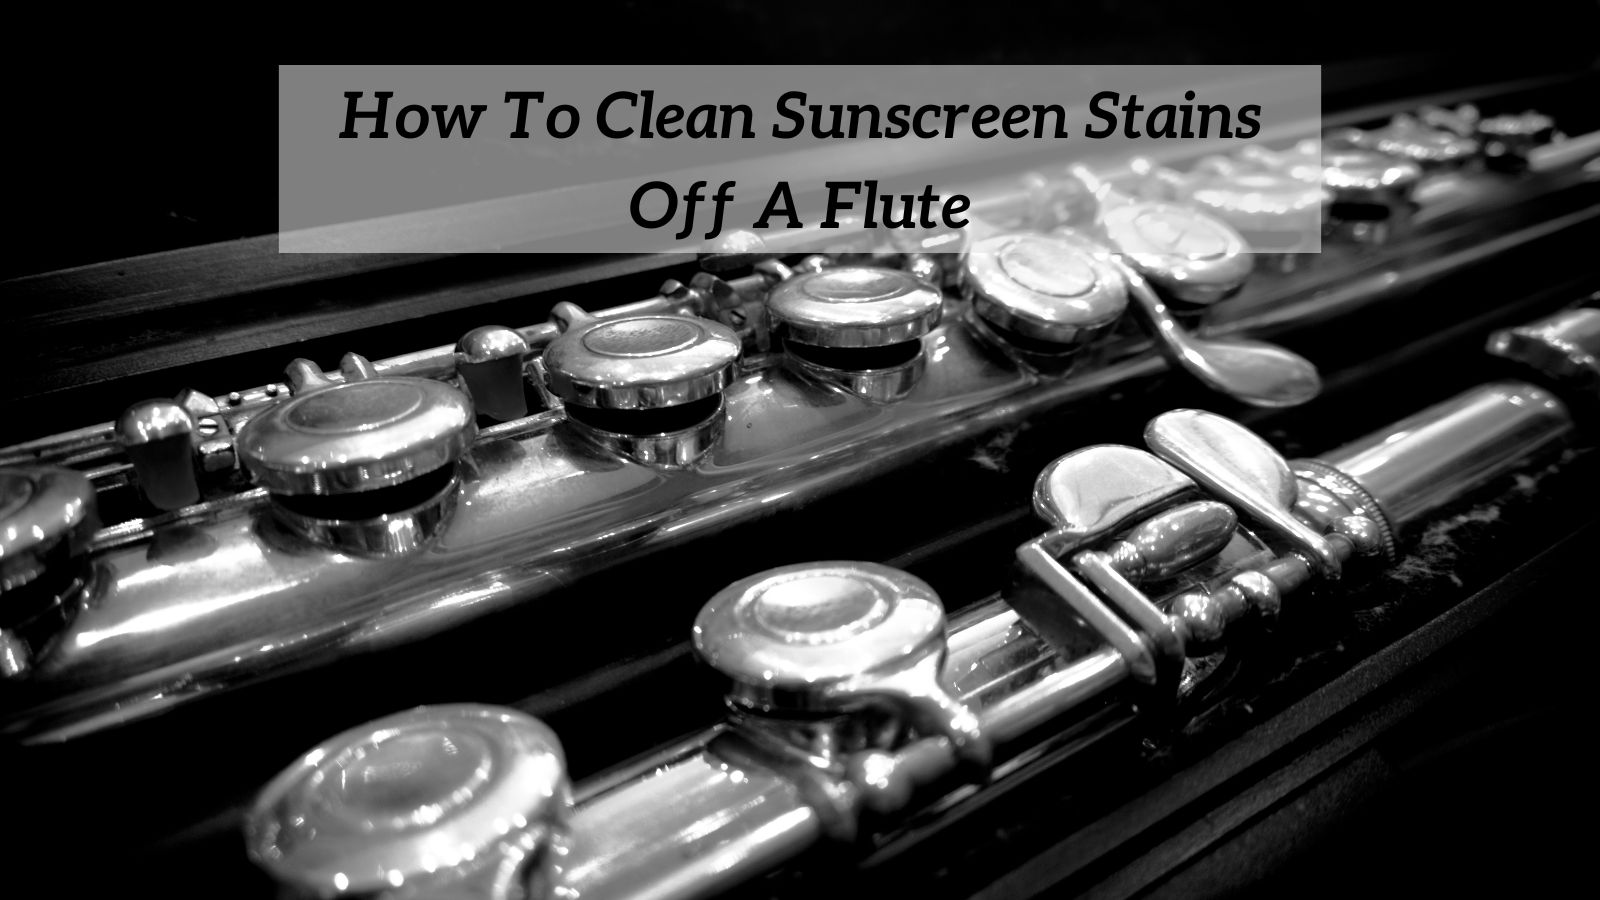 How To Clean Sunscreen Stains Off A Flute